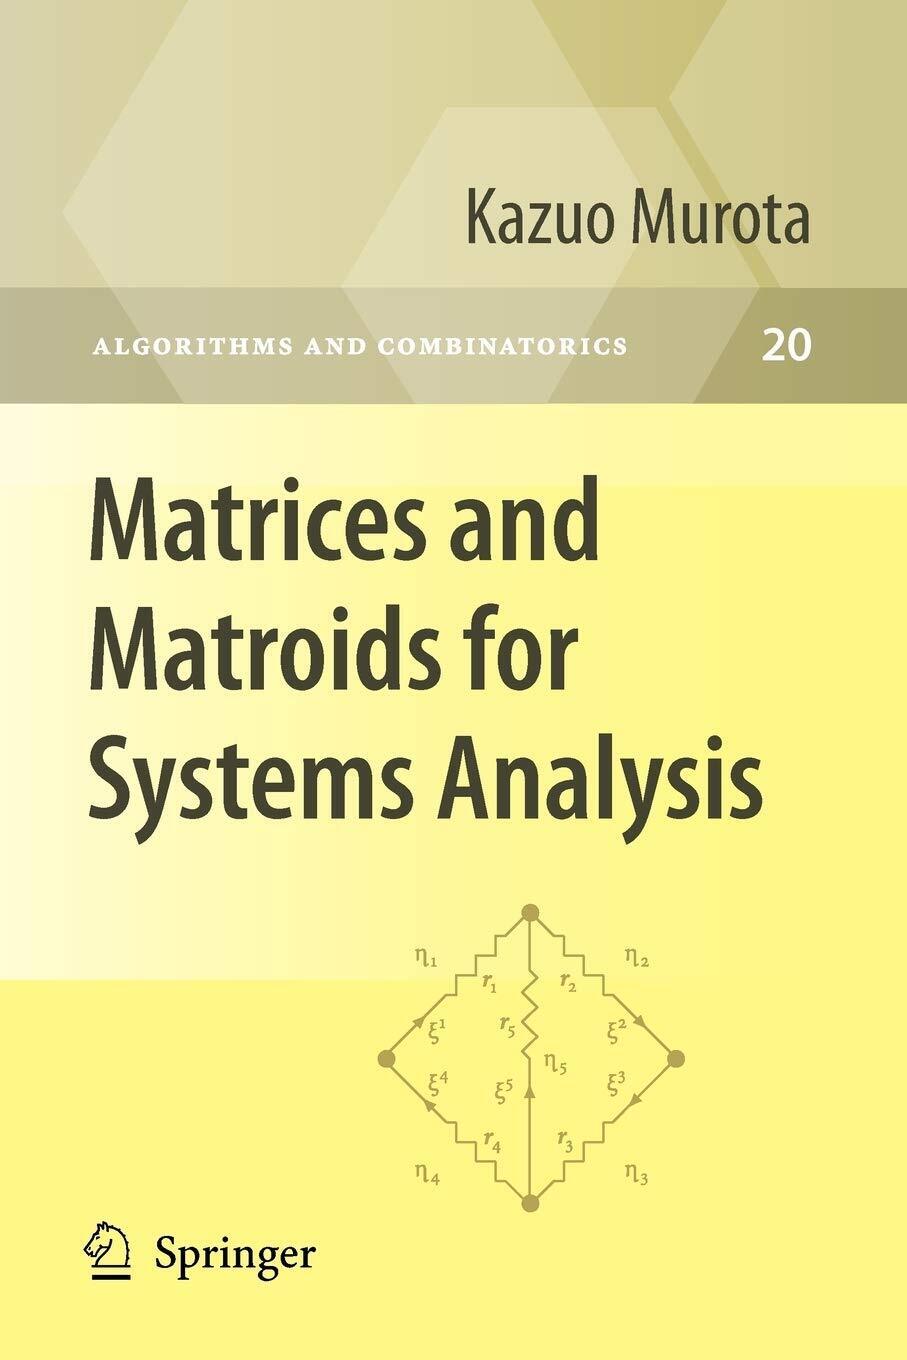 Matrices And Matroids For Systems Analysis - Kazuo Murota - Springer, 2009